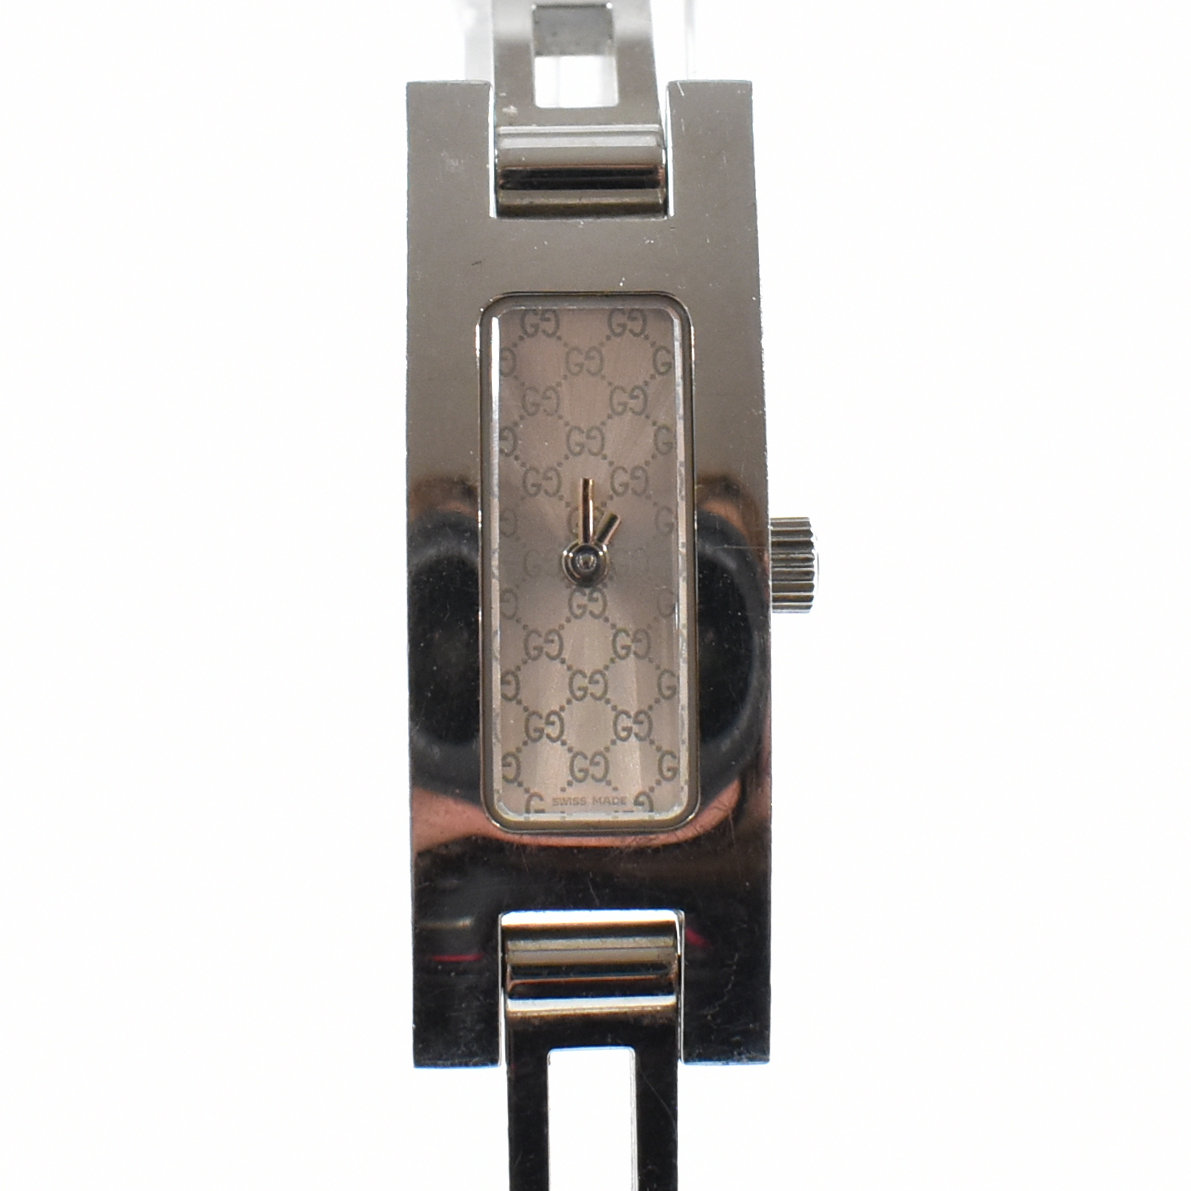 GUCCI 3900L STAINLESS STEEL WRIST WATCH - Image 6 of 10